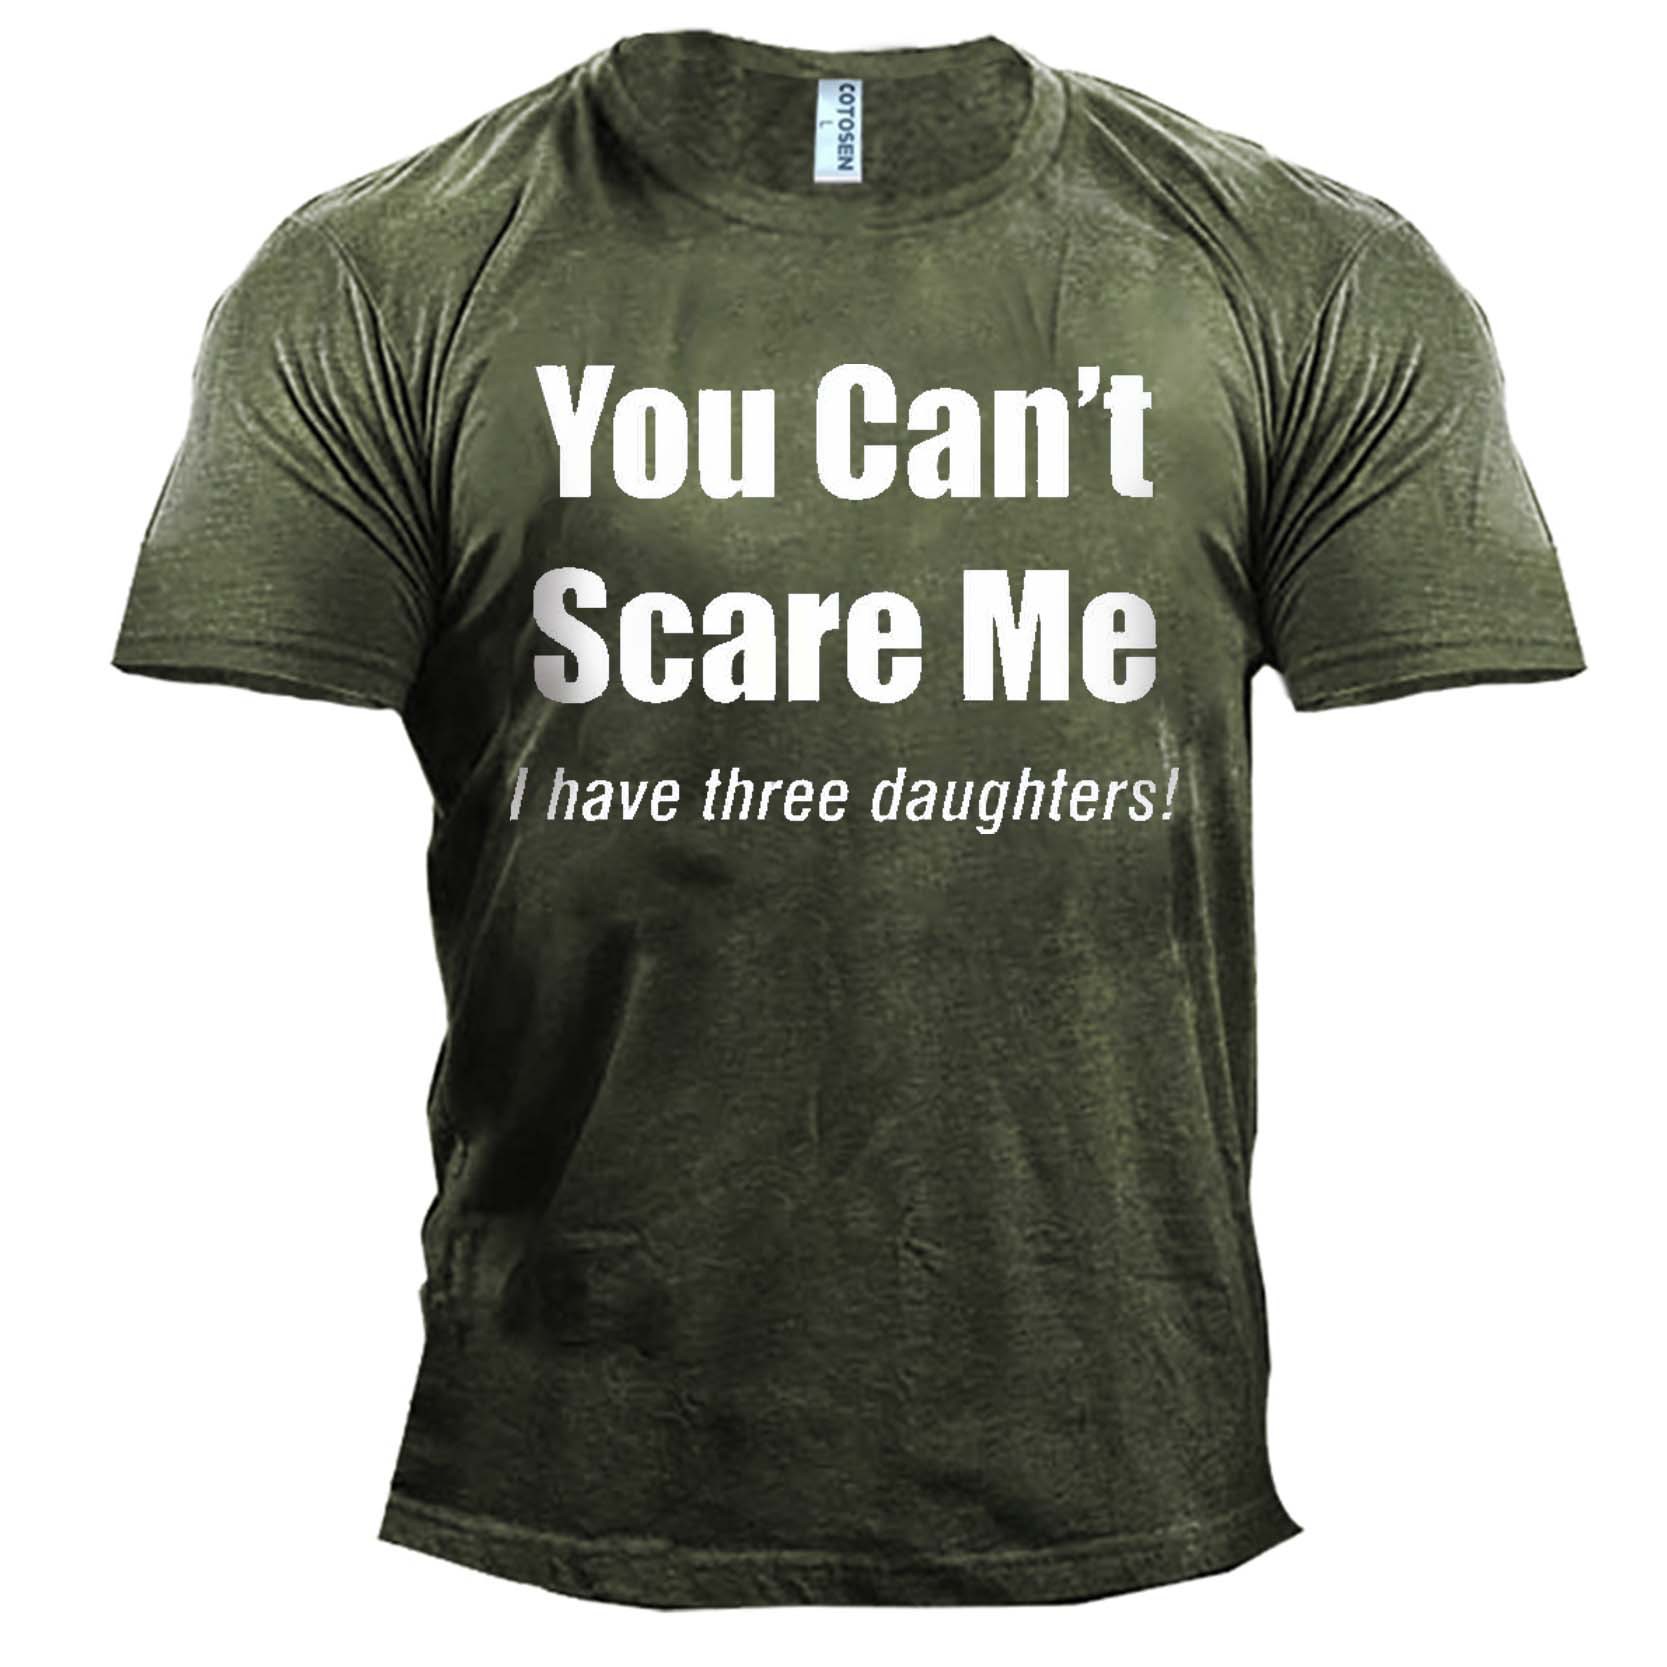 Men's Outdoor You Can't Chic Scare Me I Have Daughters Cotton T-shirt